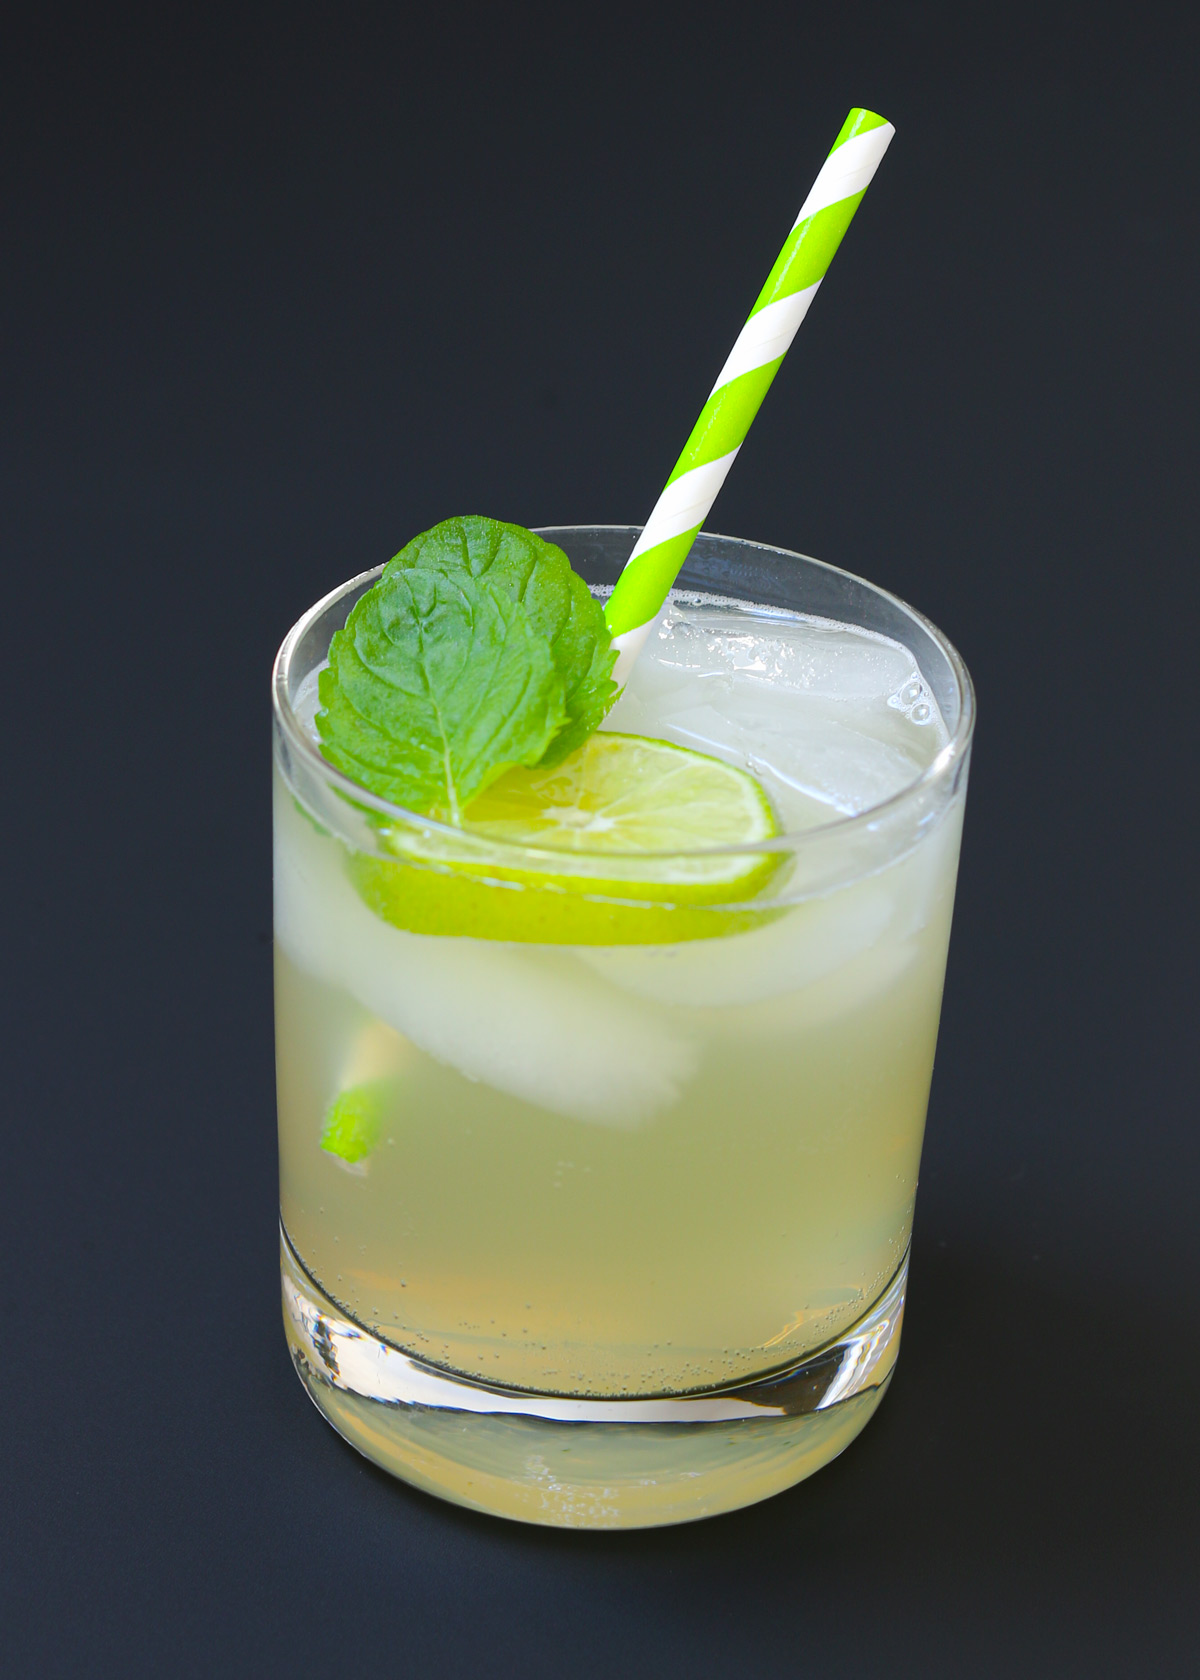 a green paper straw and garnishes are added to the mojito mocktail.